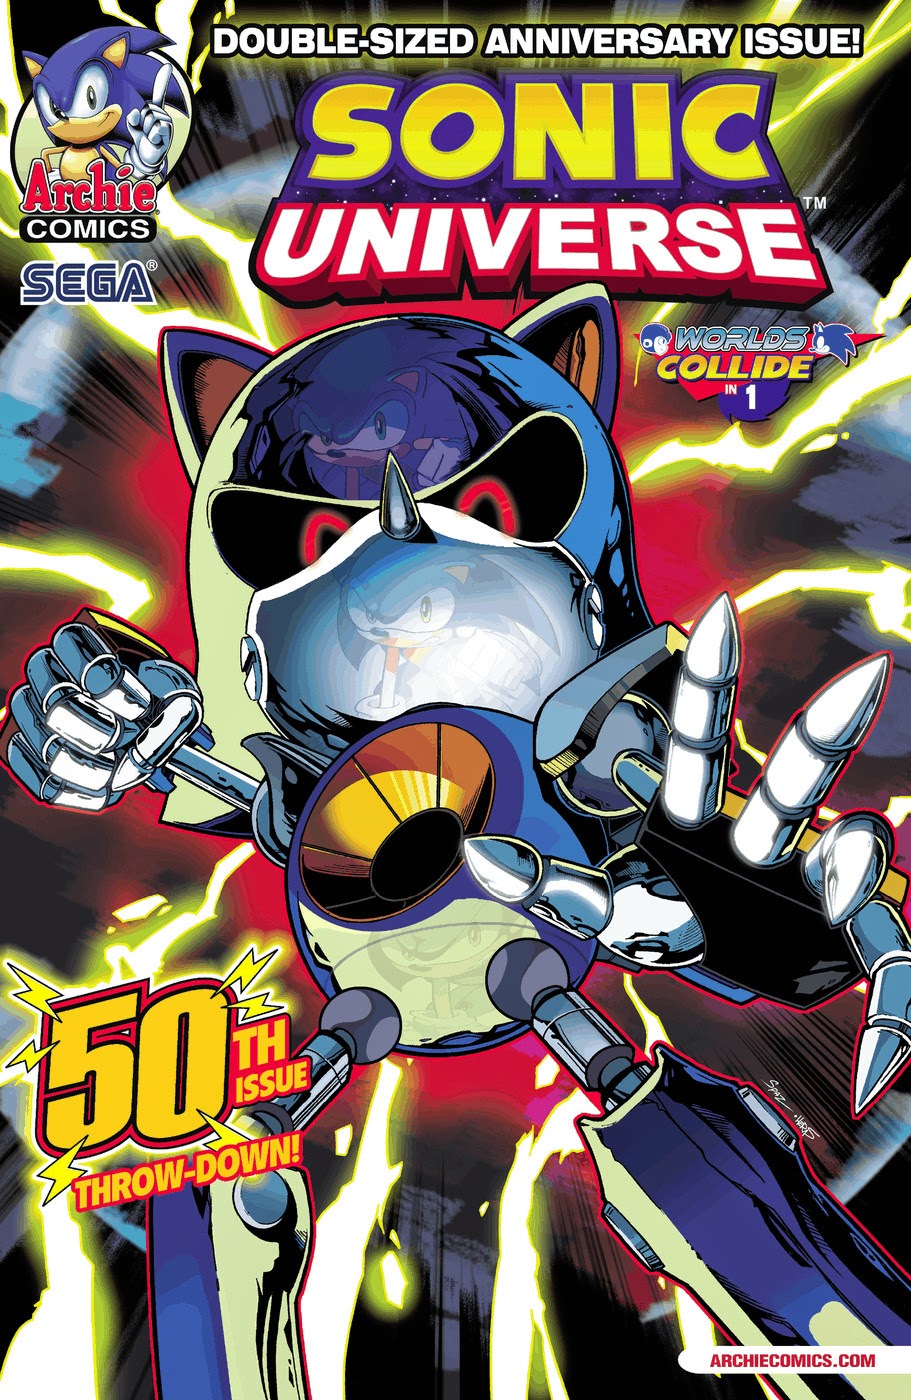 Sonic X Issue 13  Read Sonic X Issue 13 comic online in high